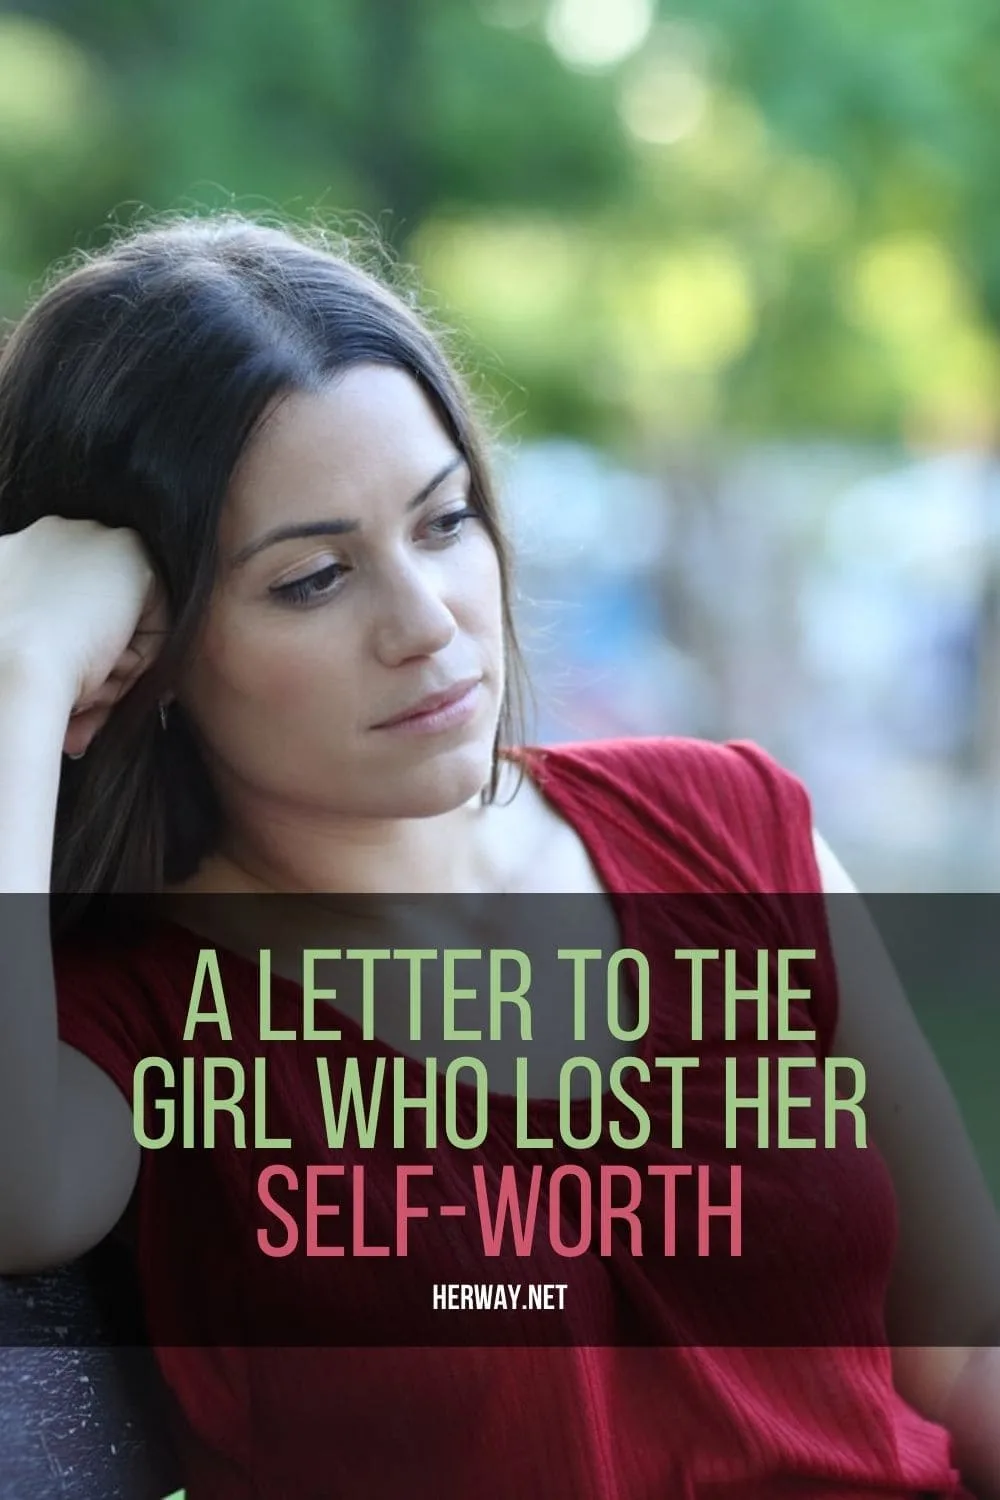 A Letter To The Girl Who Lost Her Self-Worth